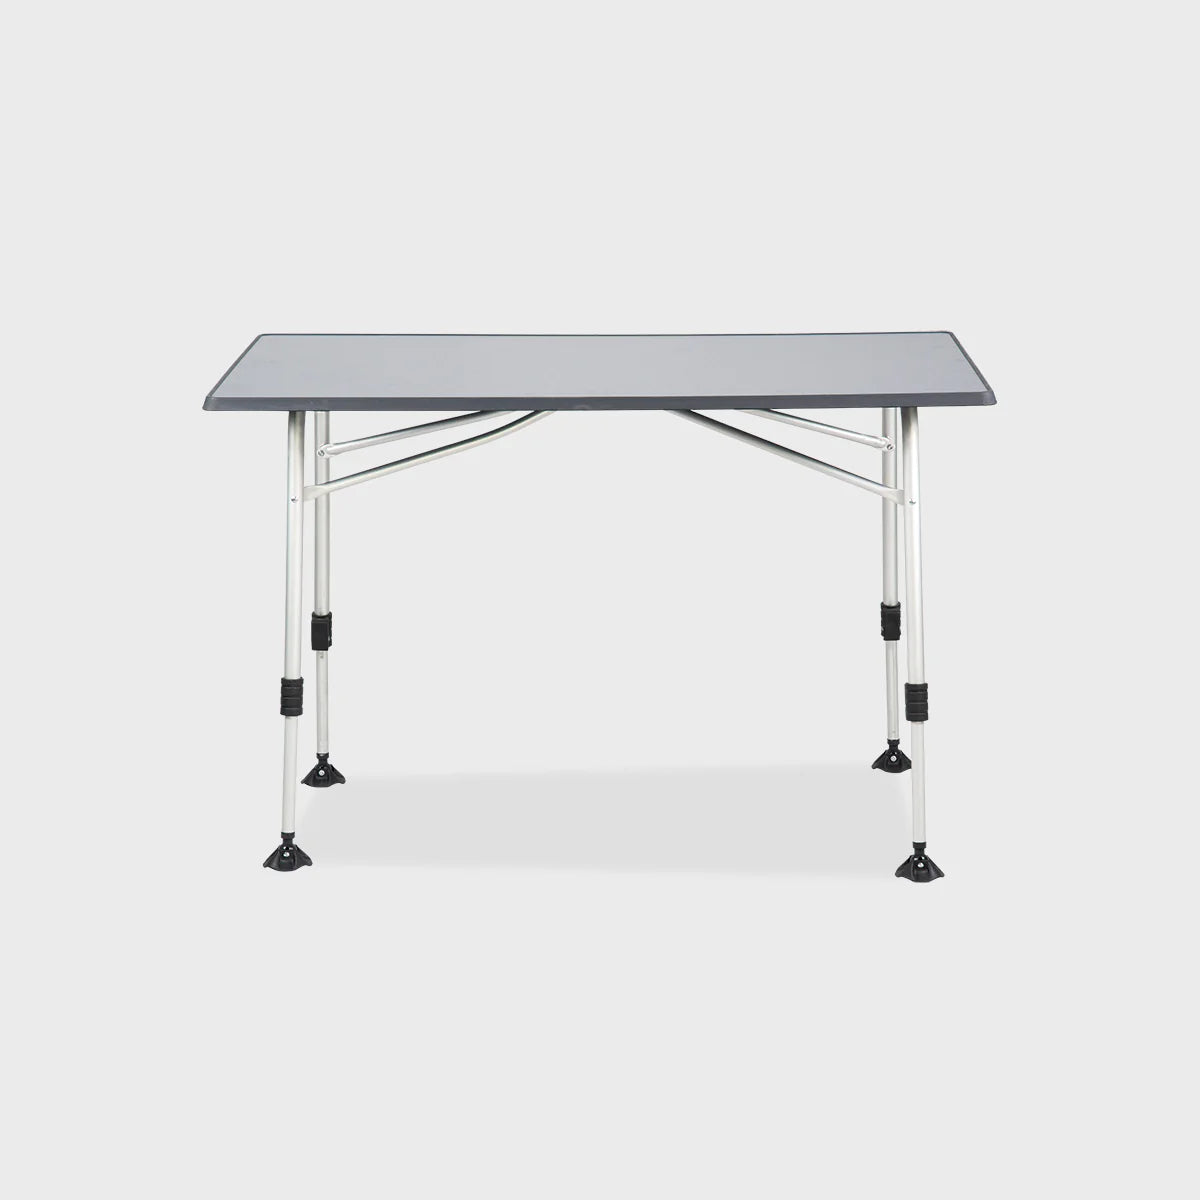 Portal Outdoor - Monte Carlo Foldable Camping Table